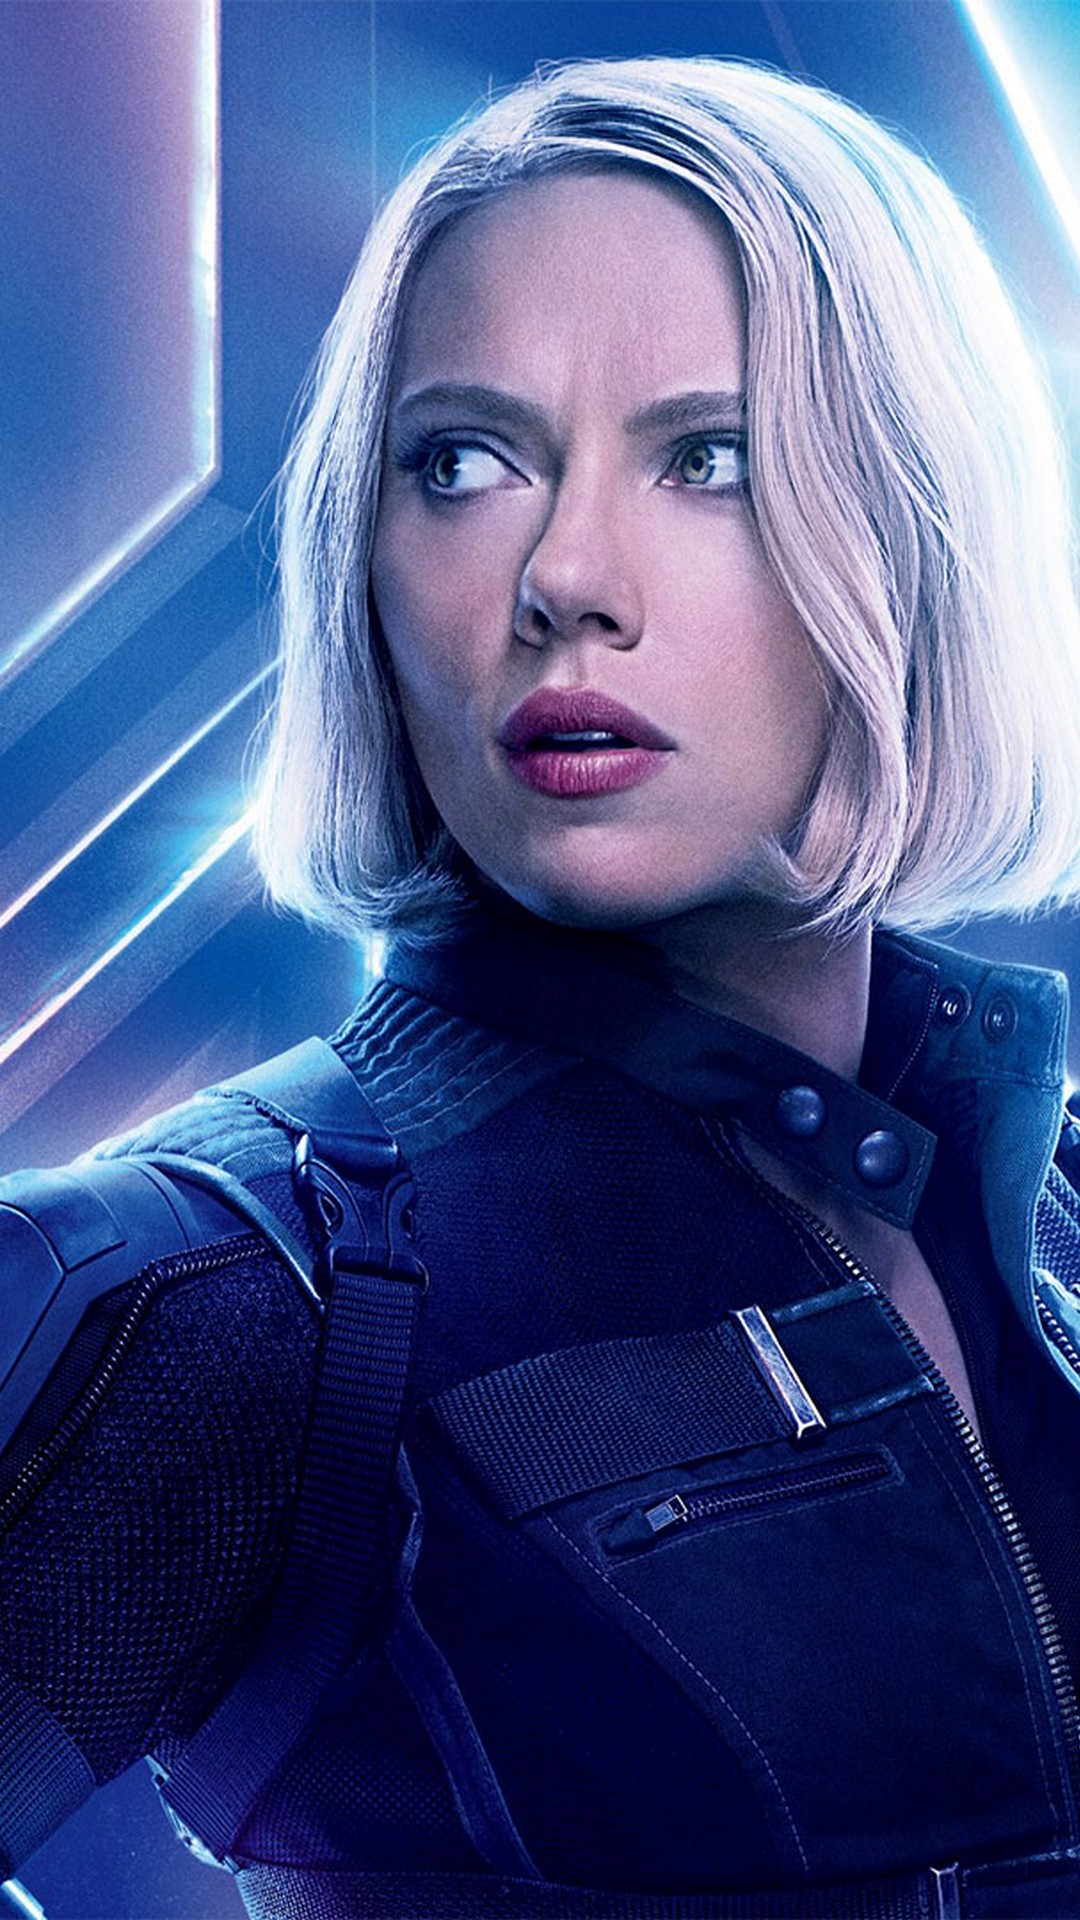 Free download Black Widow Avengers Endgame iPhone Wallpaper 2019 Movie Poster [1080x1920] for your Desktop, Mobile & Tablet. Explore Black Widow Endgame Wallpaper. Black Widow Endgame Wallpaper, Black Widow